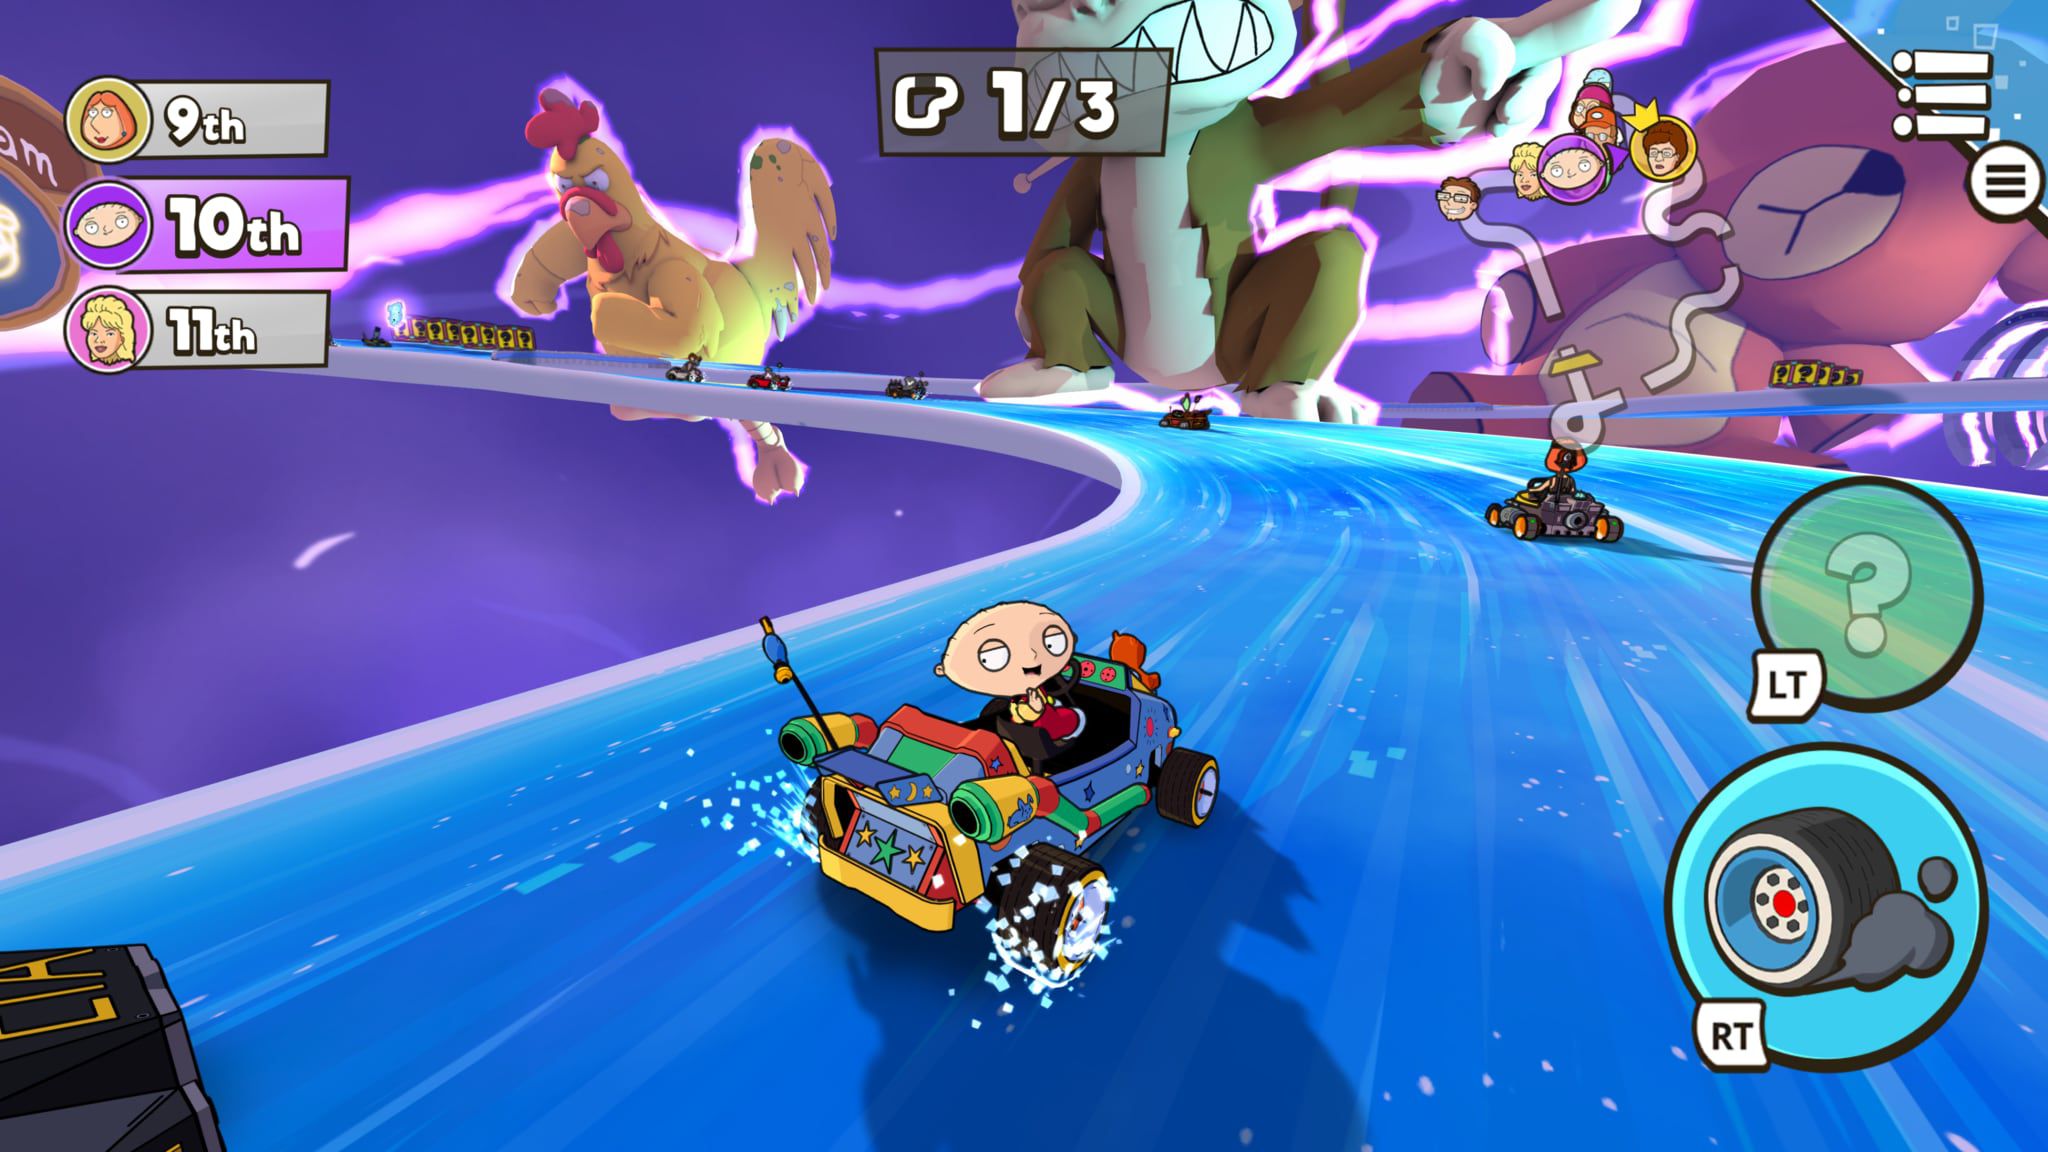 Warped Kart Racers Featuring Characters From 'Family Guy' and 'King of the Hill' Coming to Apple Arcade - macrumors.com